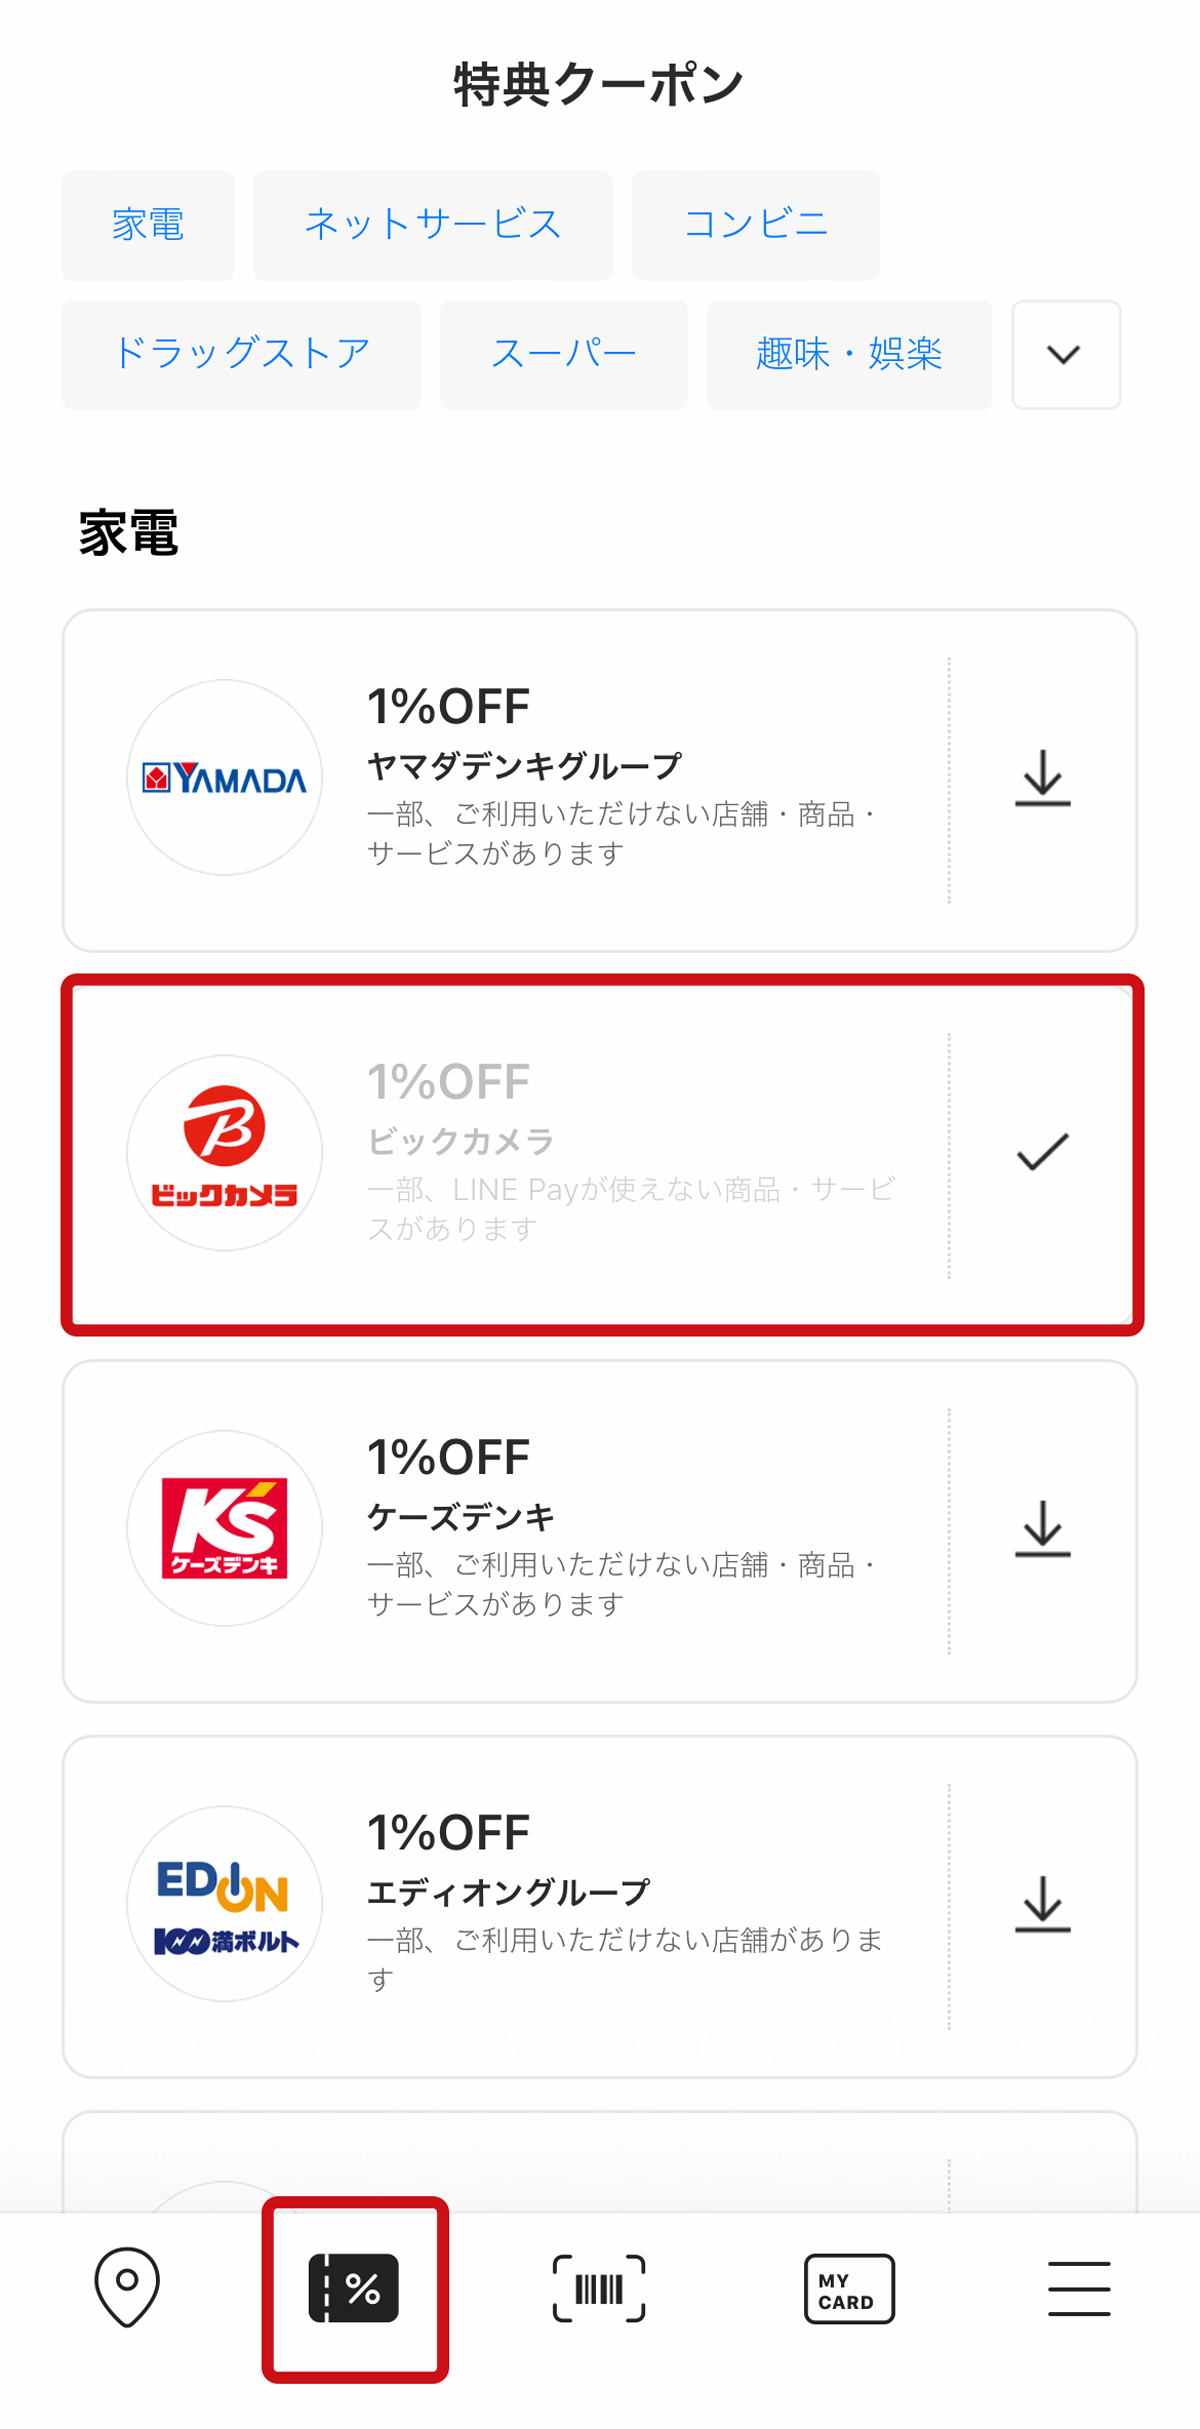 LINE PAY coupon